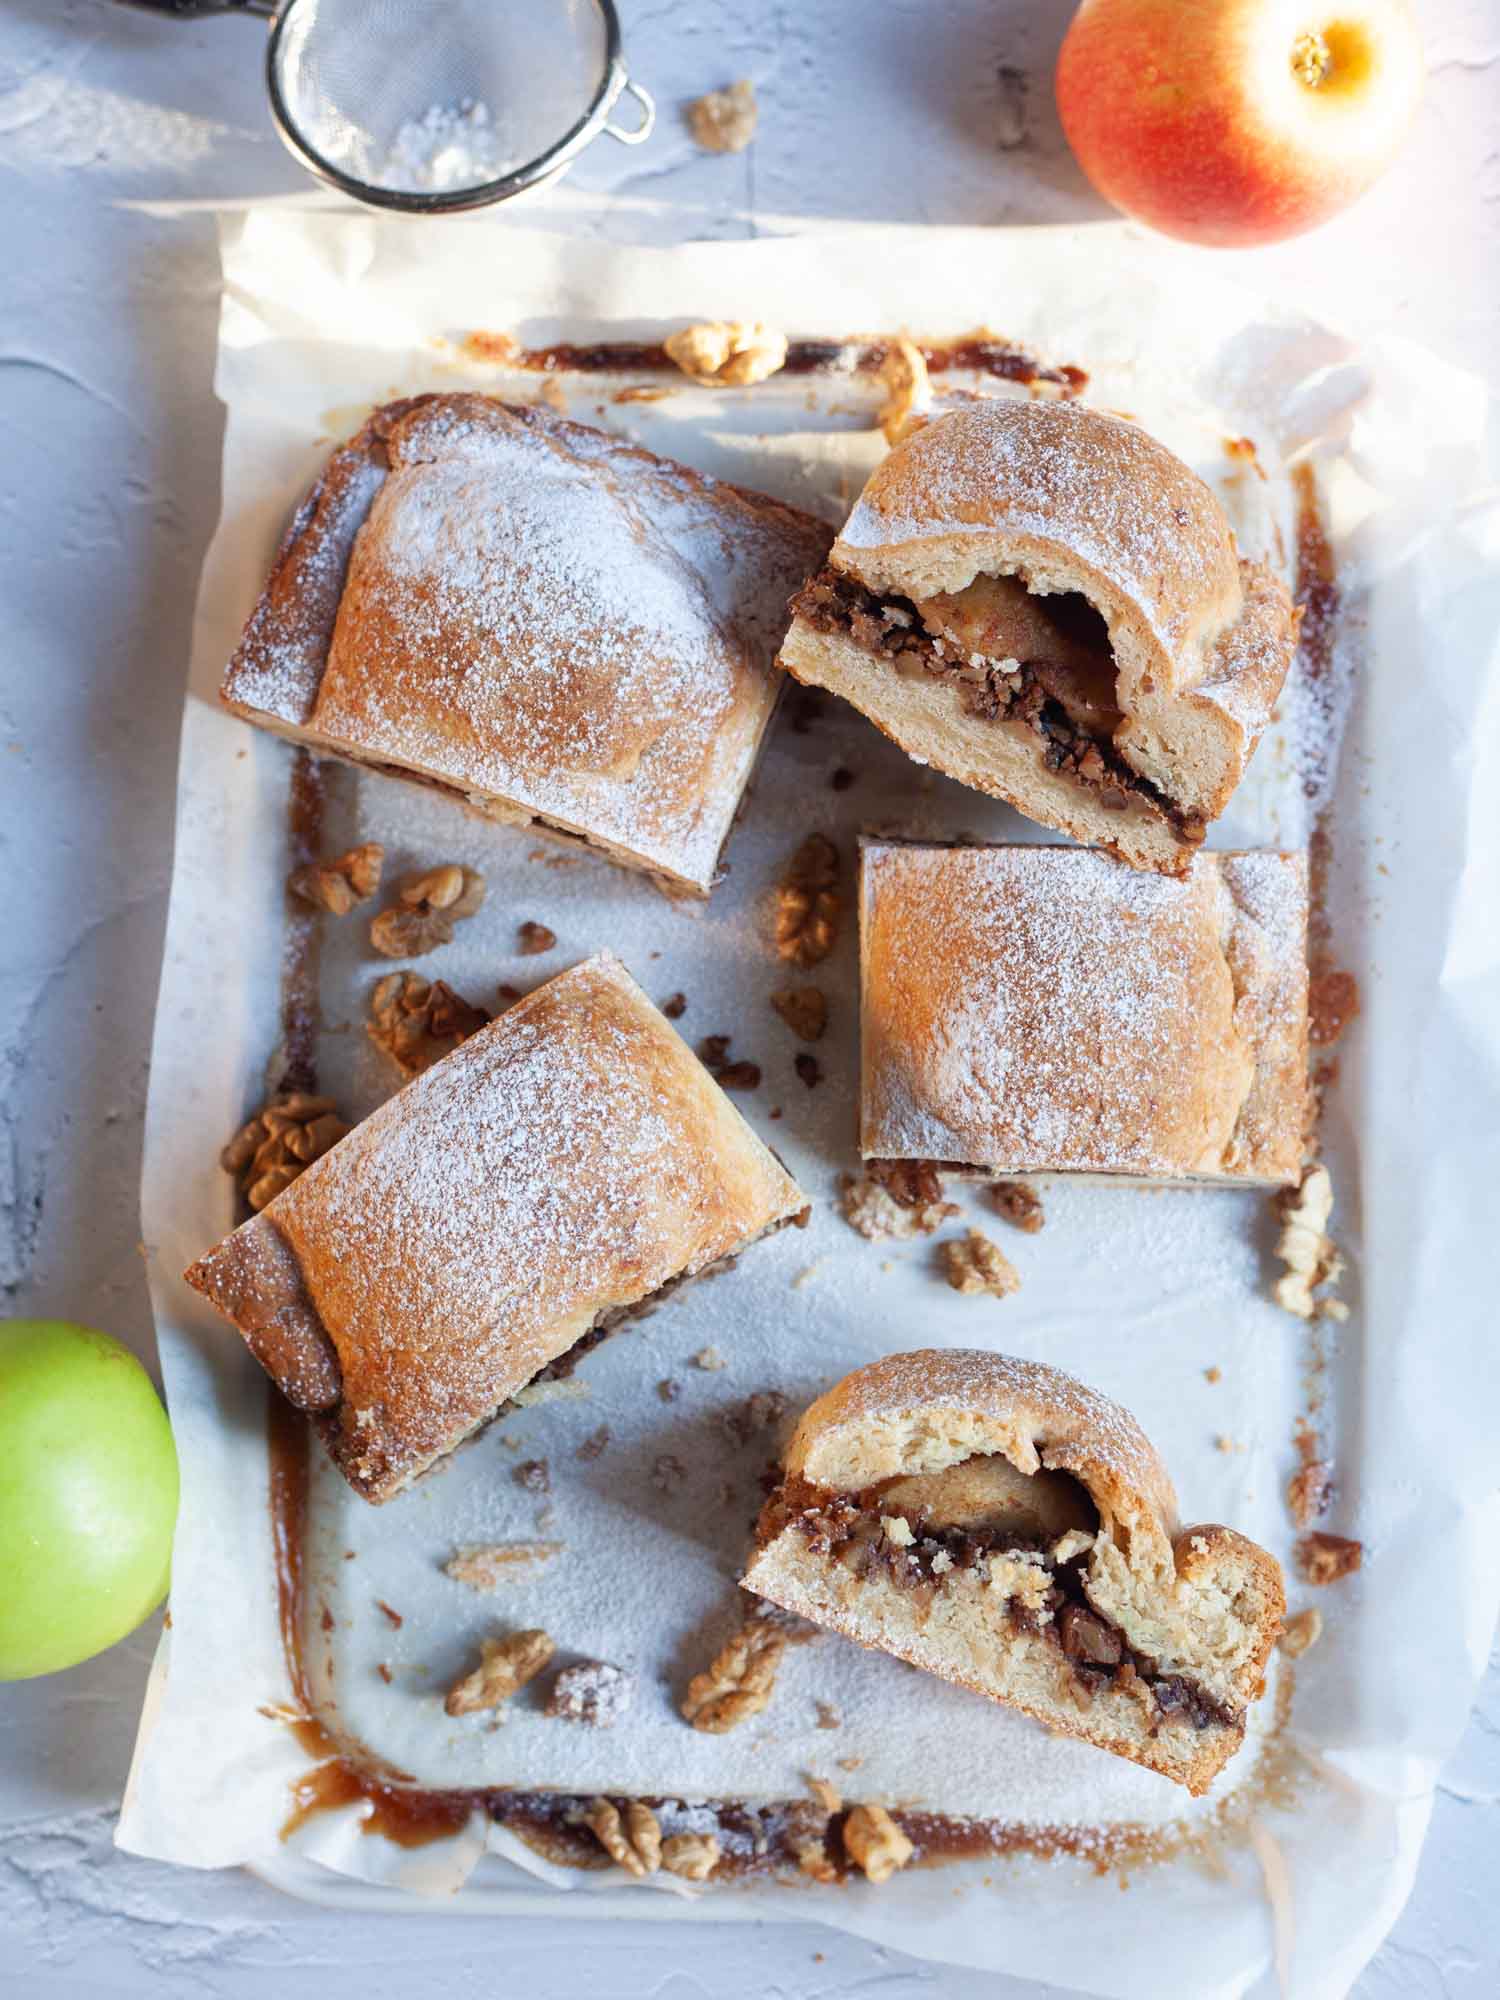 Apple-pie-with-candied-walnuts